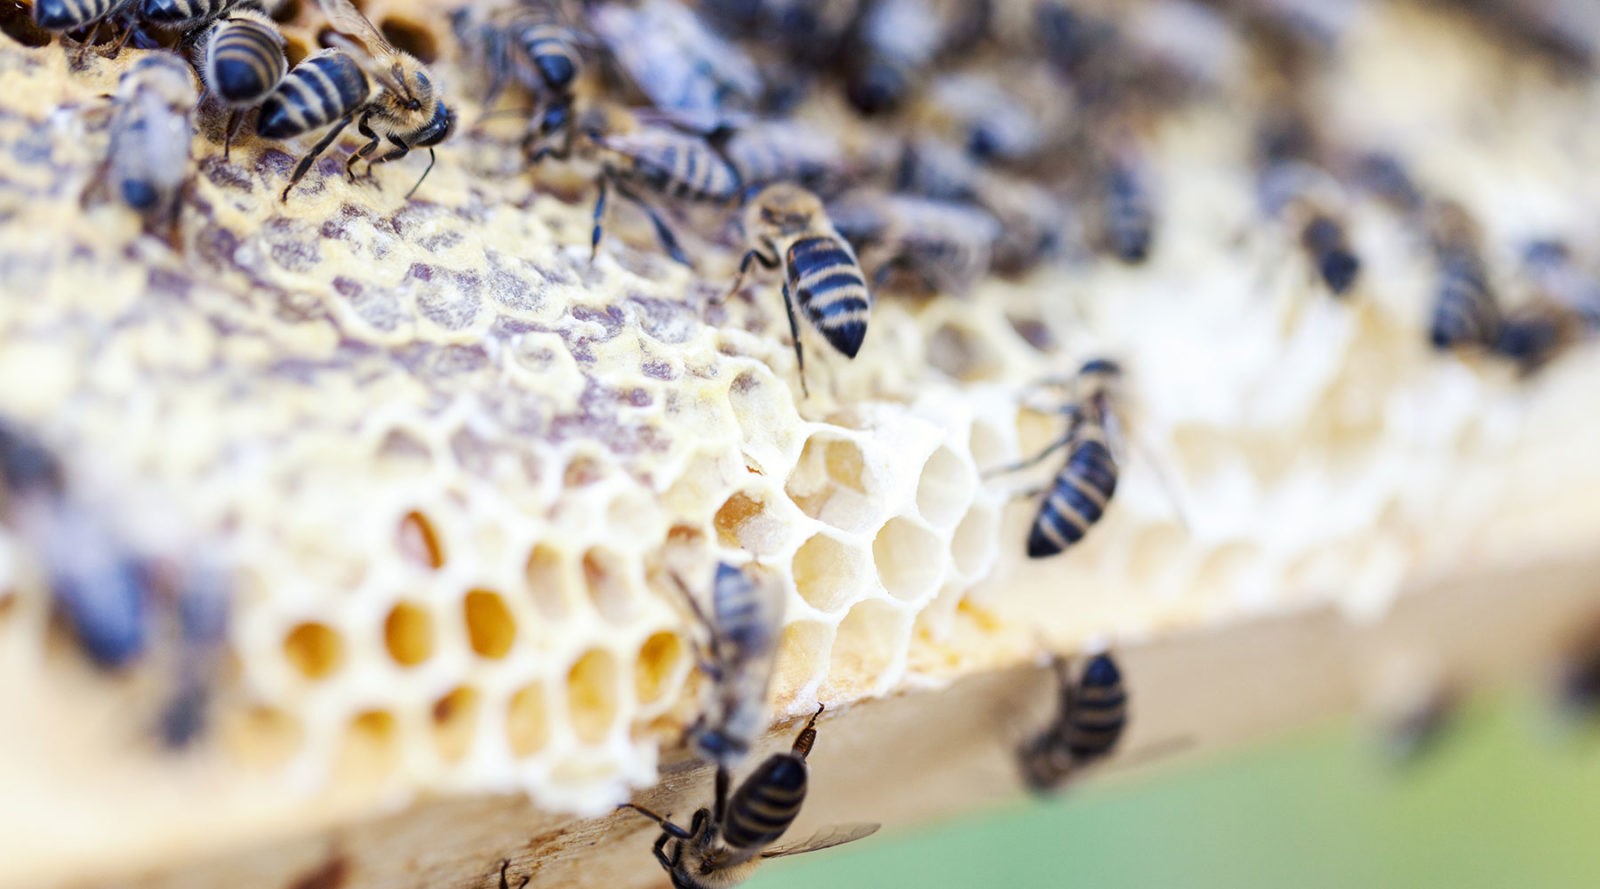 The search for beekeeping